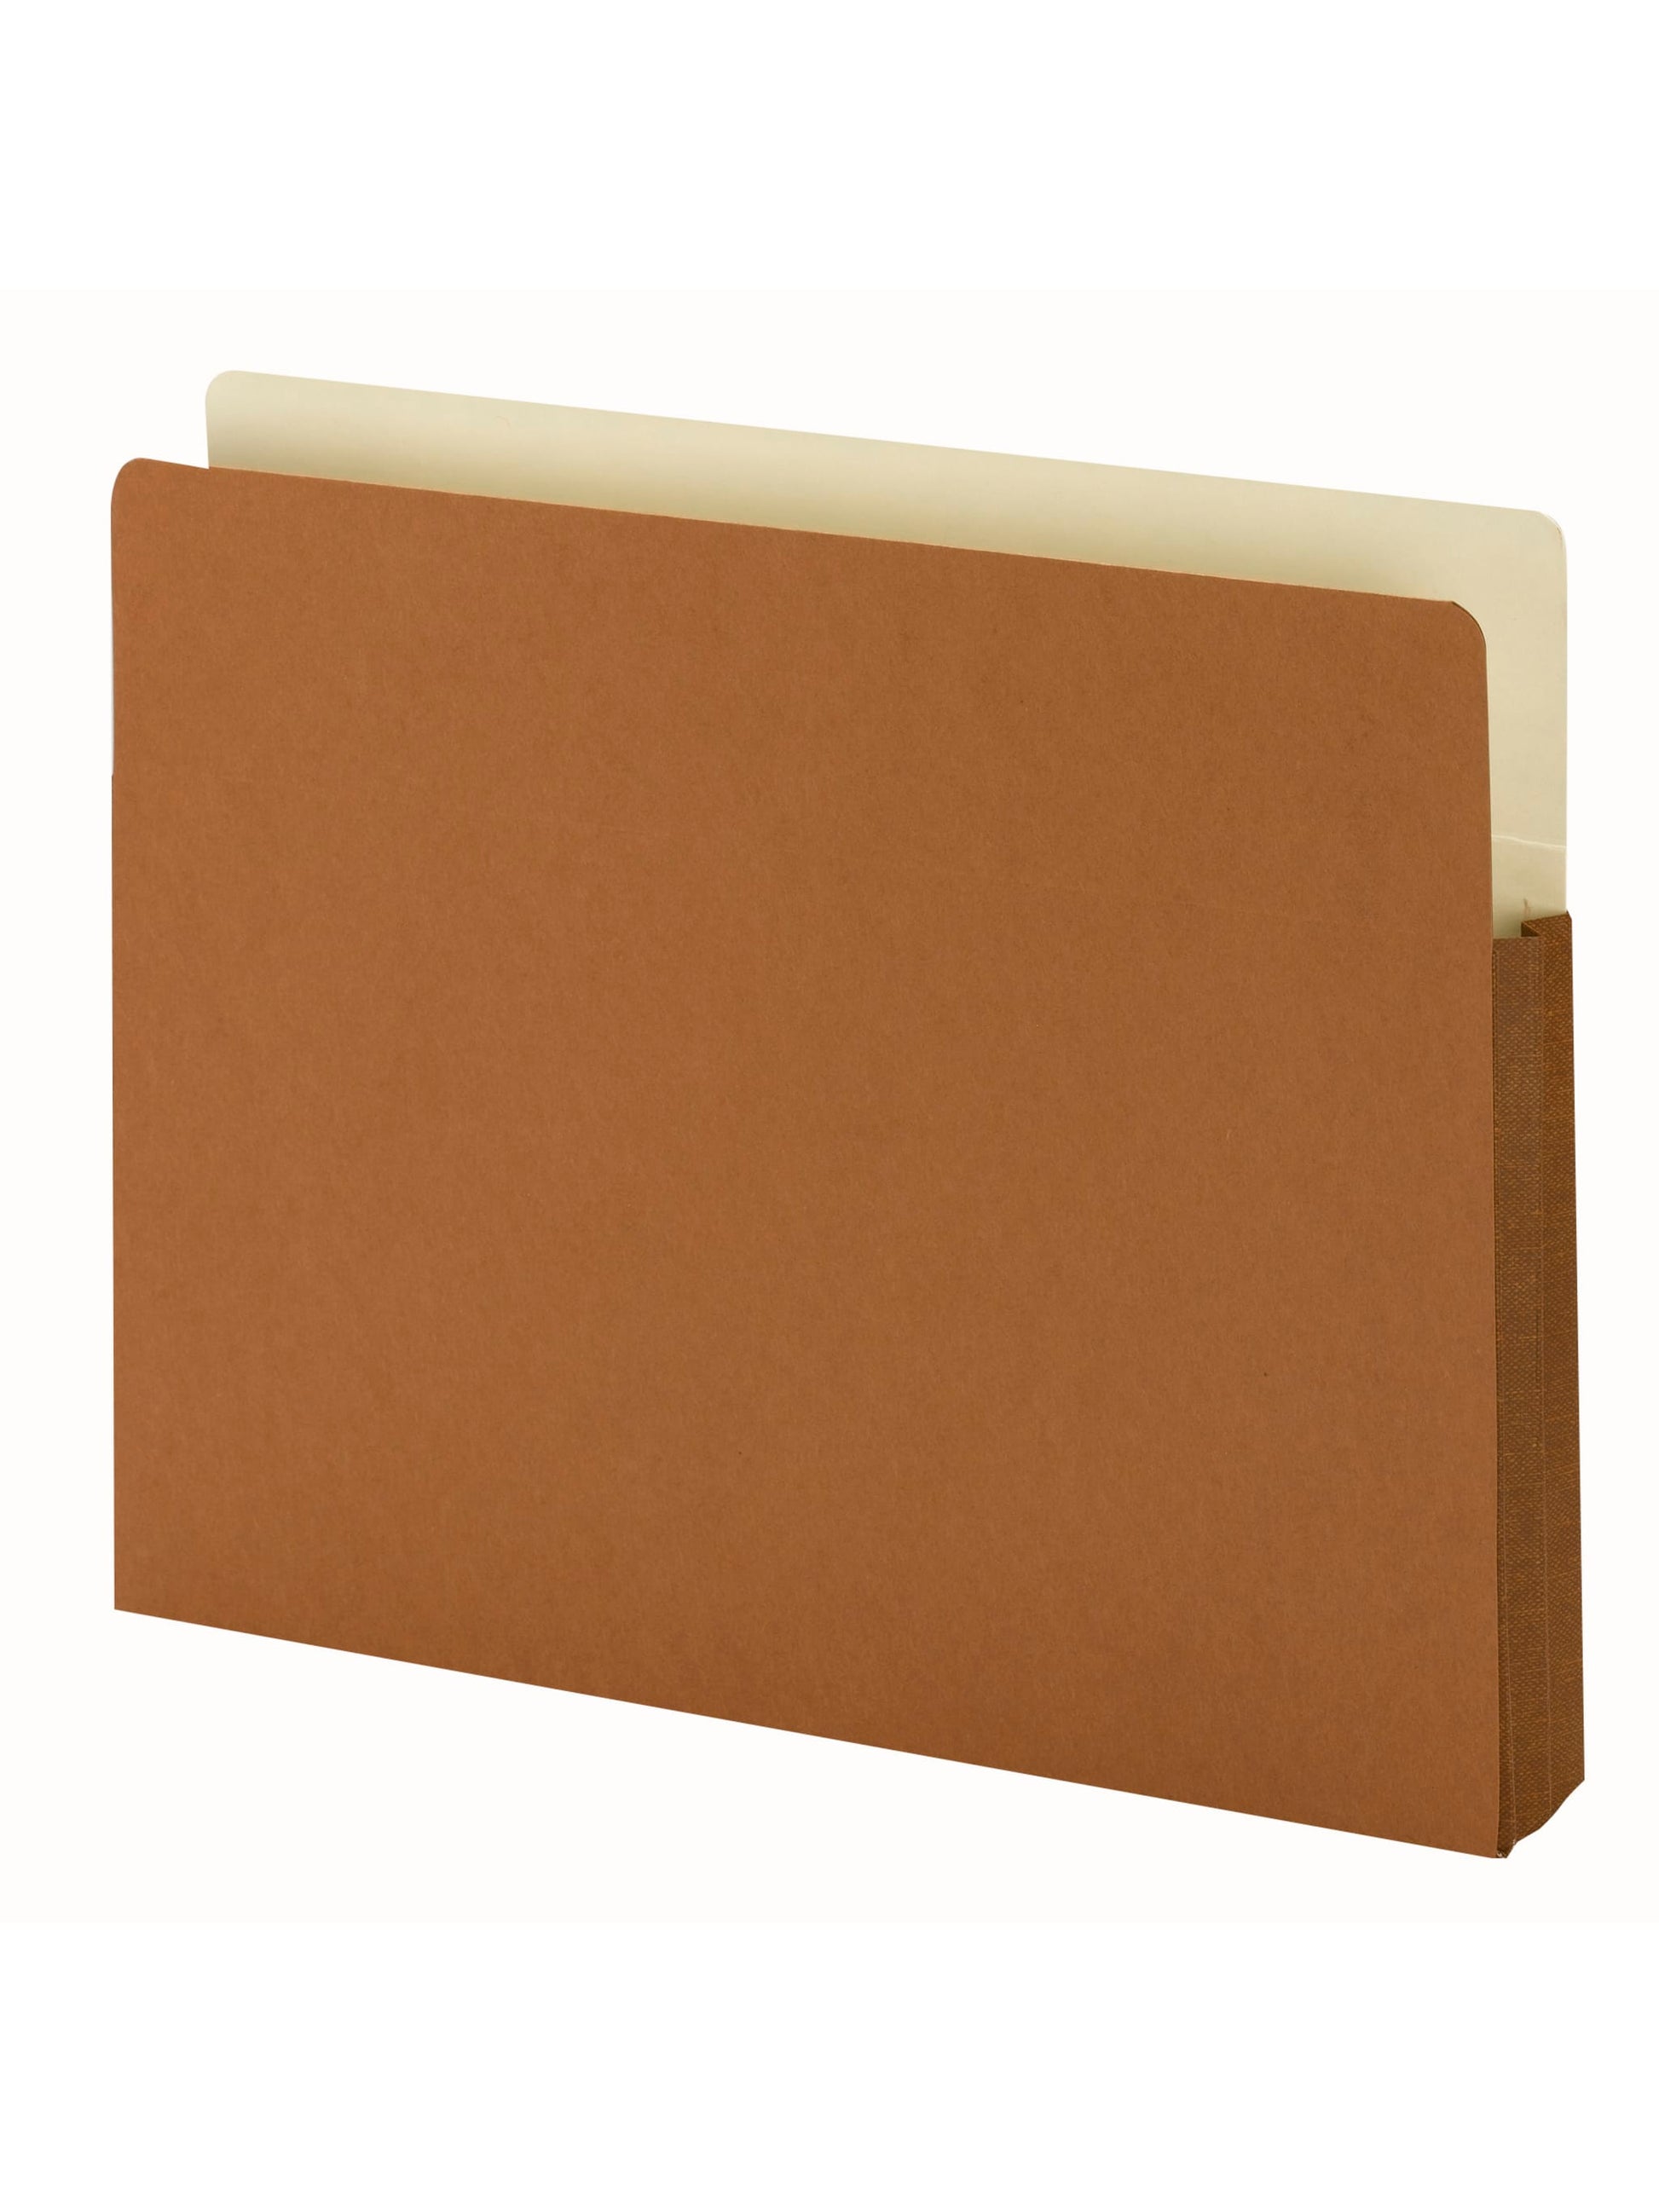 File Pockets with Fully-Lined Gusset, 1-3/4 inch Expansion, Straight-Cut Tab, Redrope Color, Letter Size, Set of 0, 30086486732544